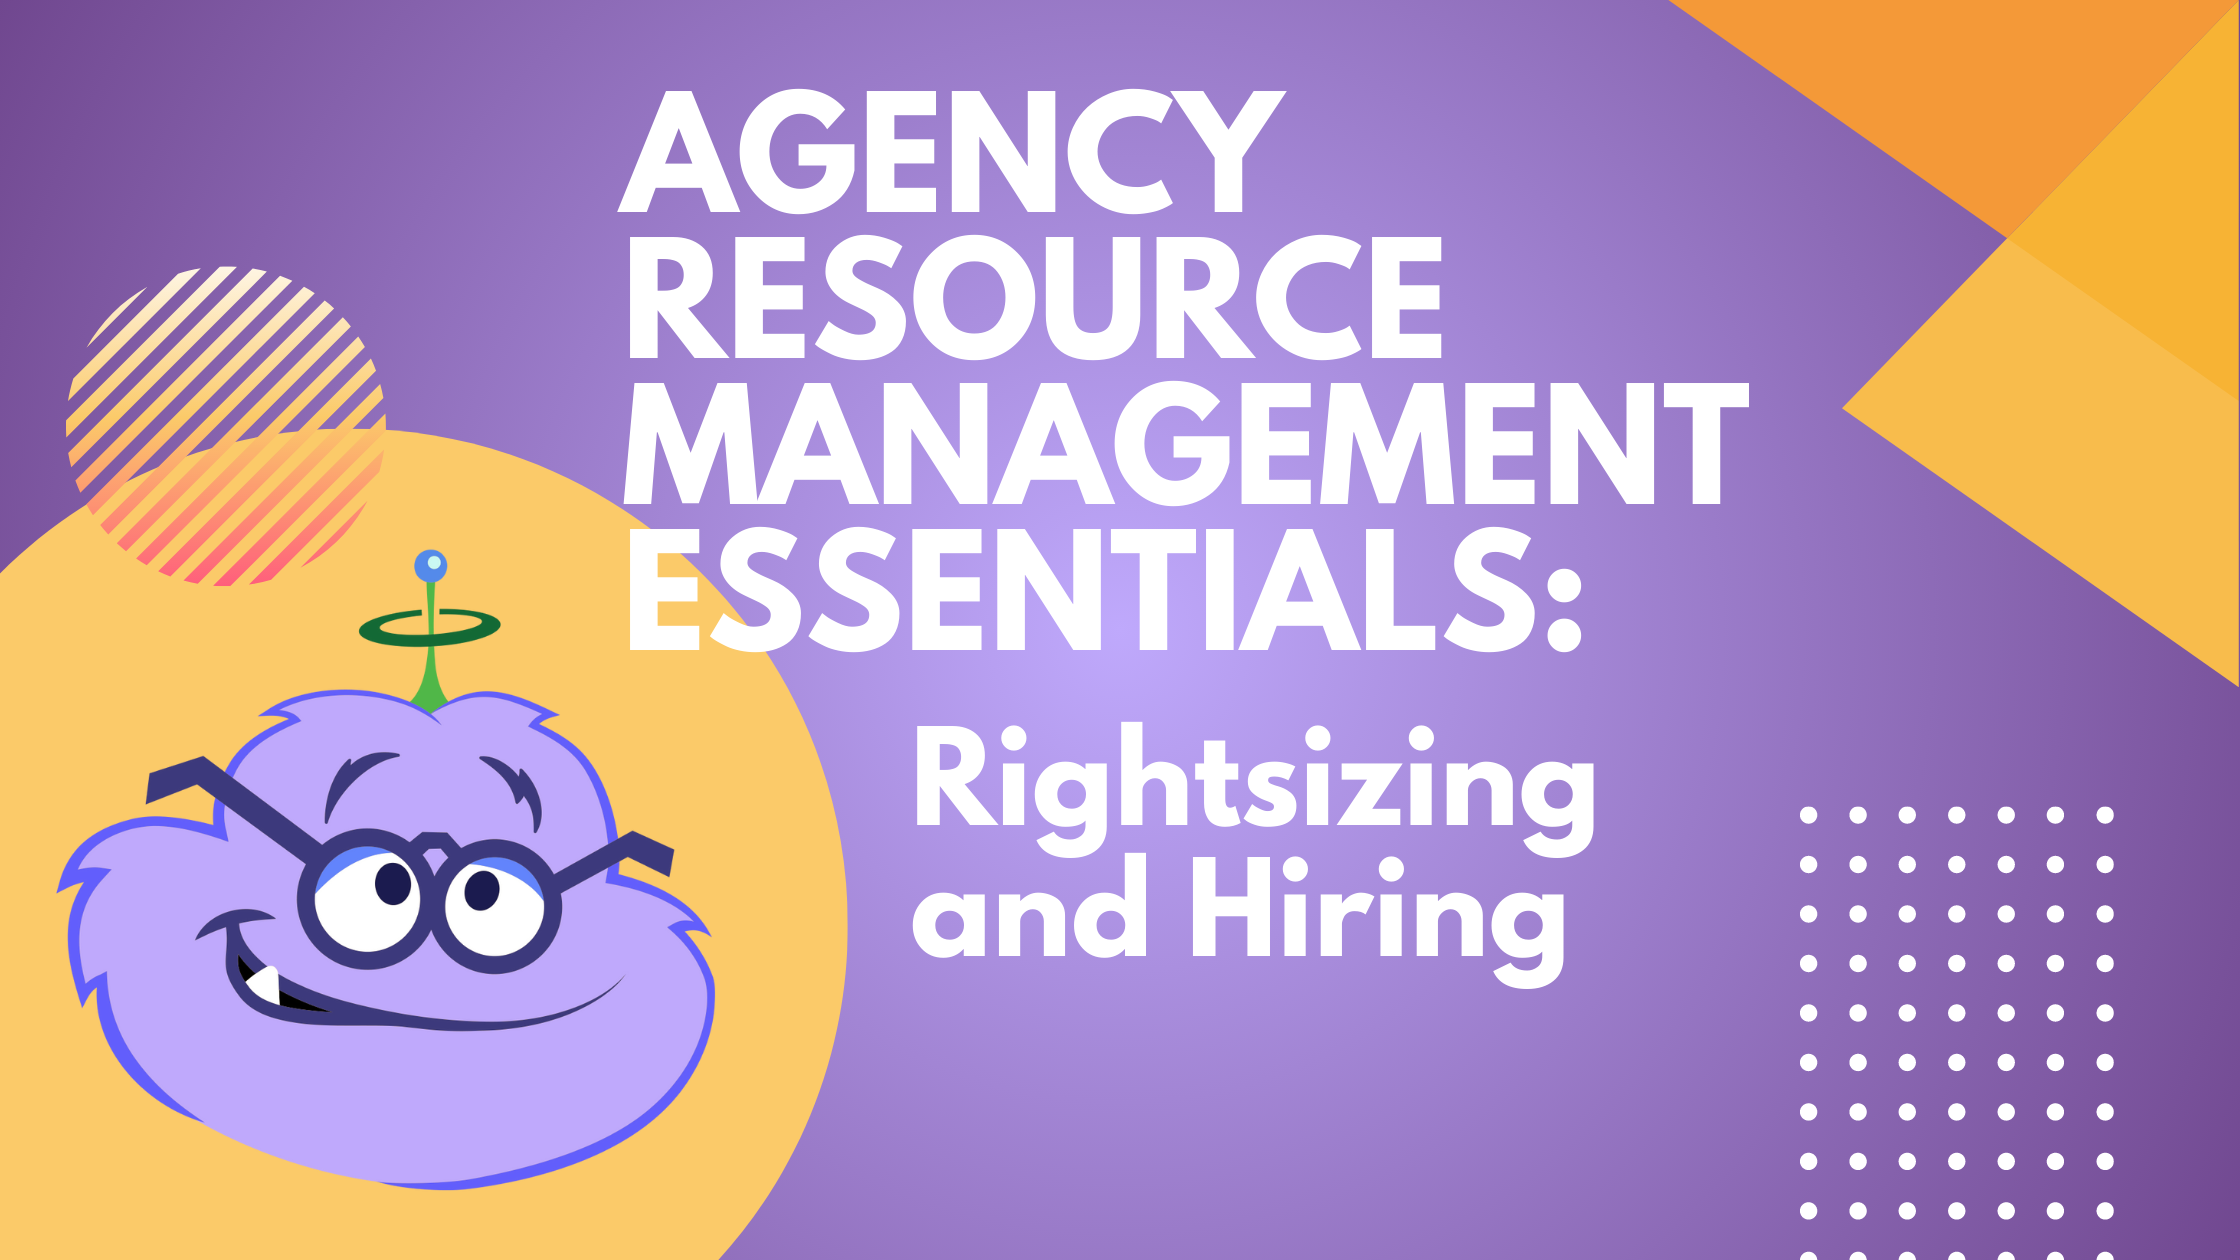 Agency Resource Management Essentials: Rightsizing and Hiring